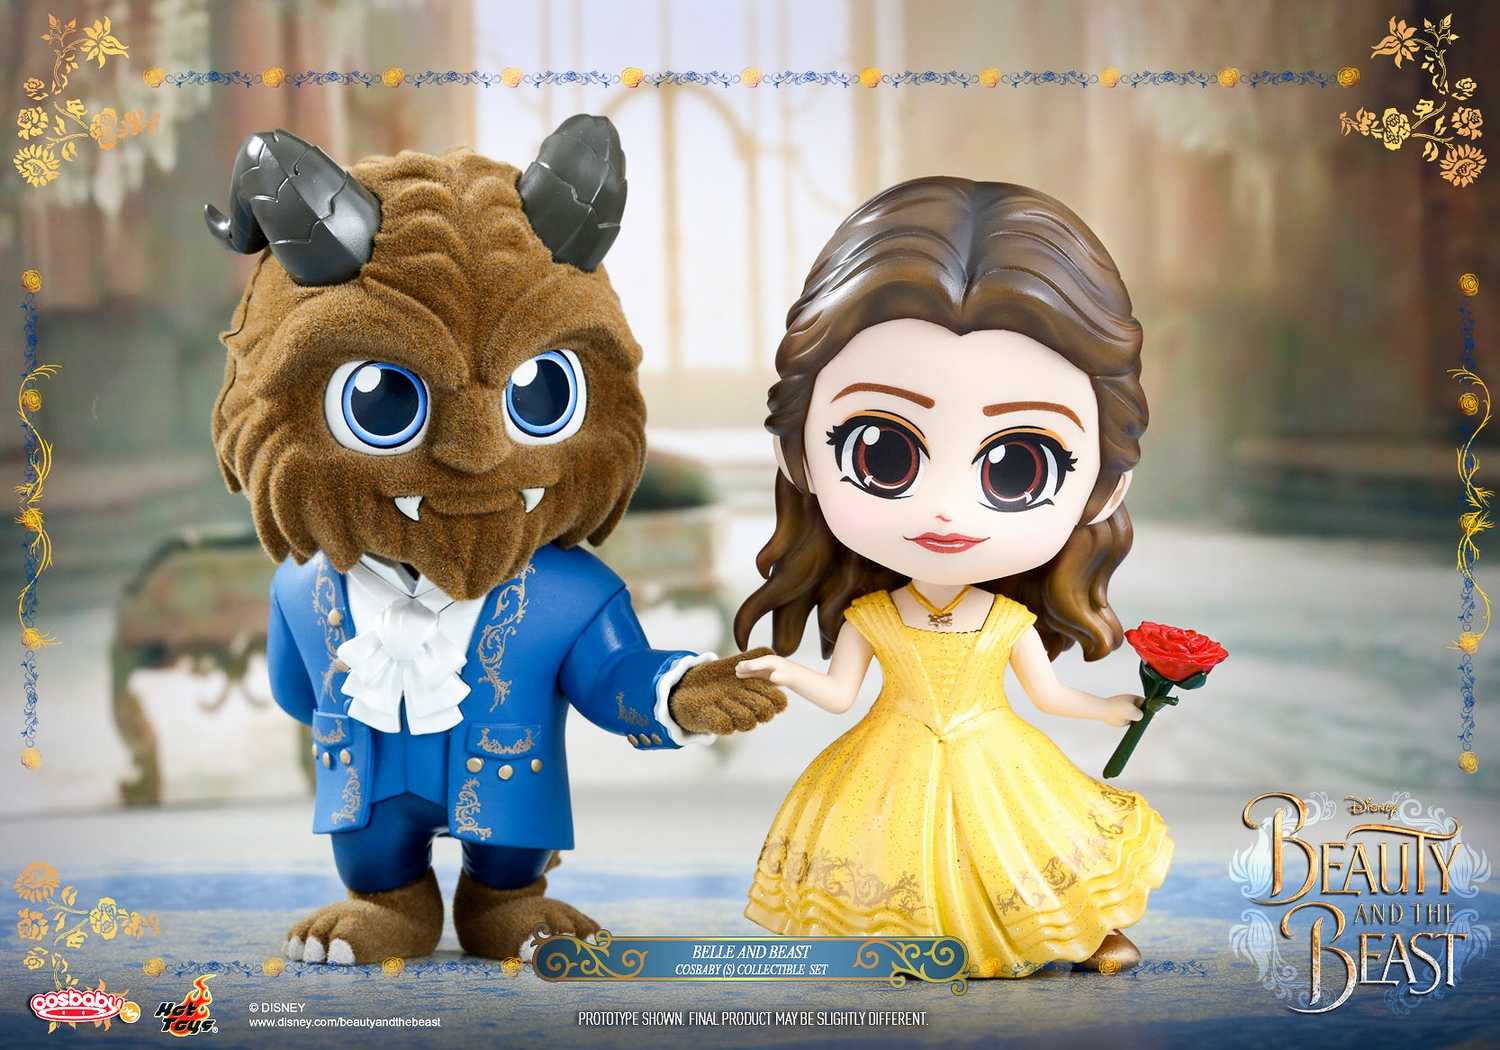 Hot-Toys-COSB352-353-Beauty-and-the-Beast-Cosbaby-003.jpg